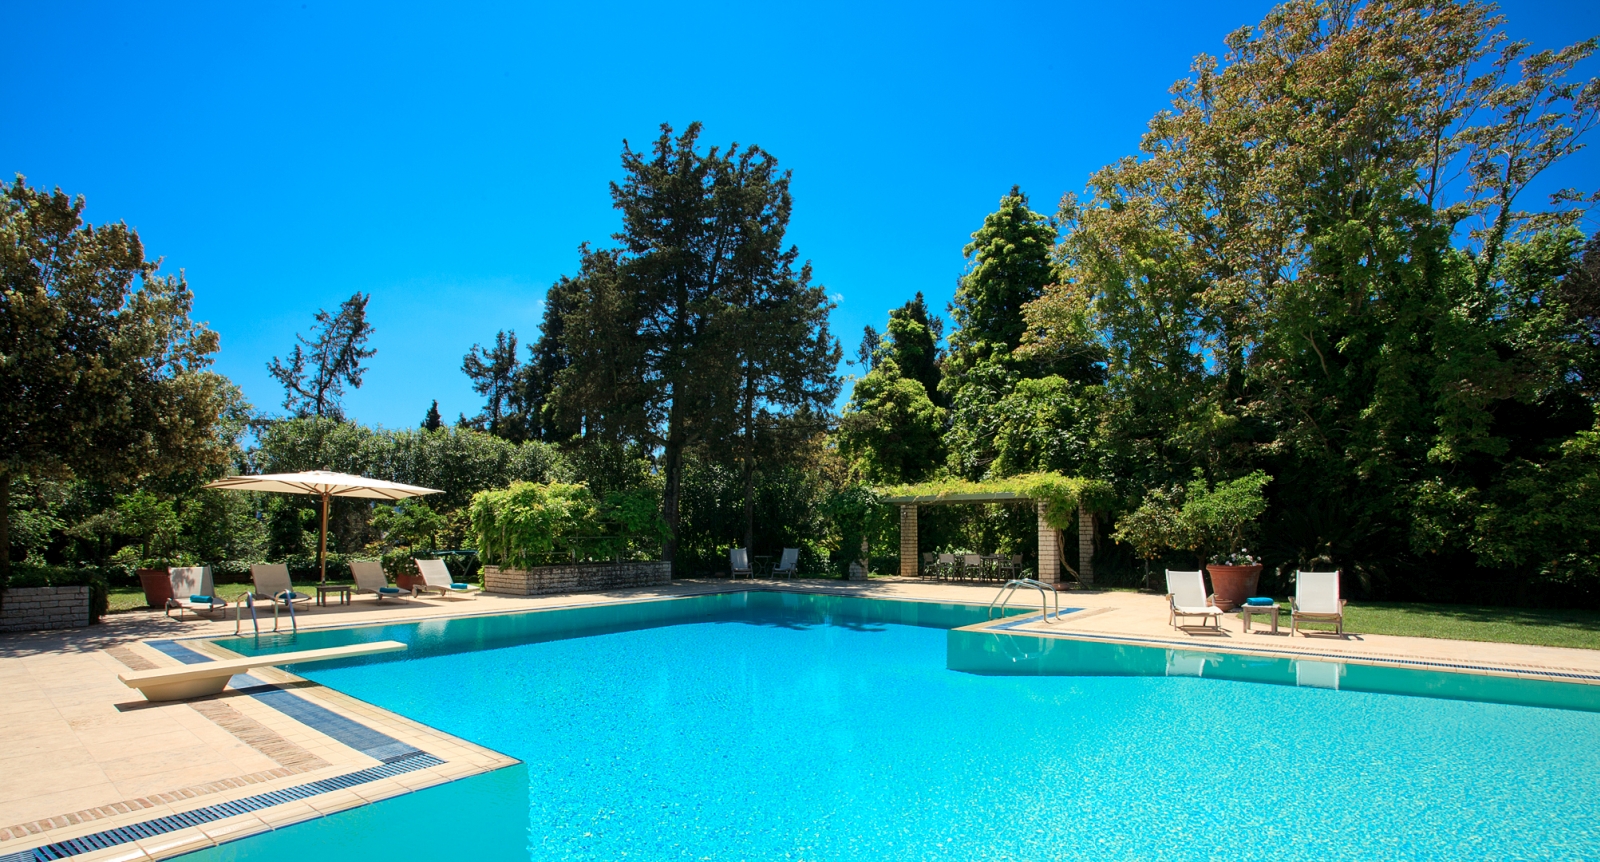 Large pool with diving board and patio area with sun loungers, umbrellas and trees at the Kanoni Estate on Corfu, Greece